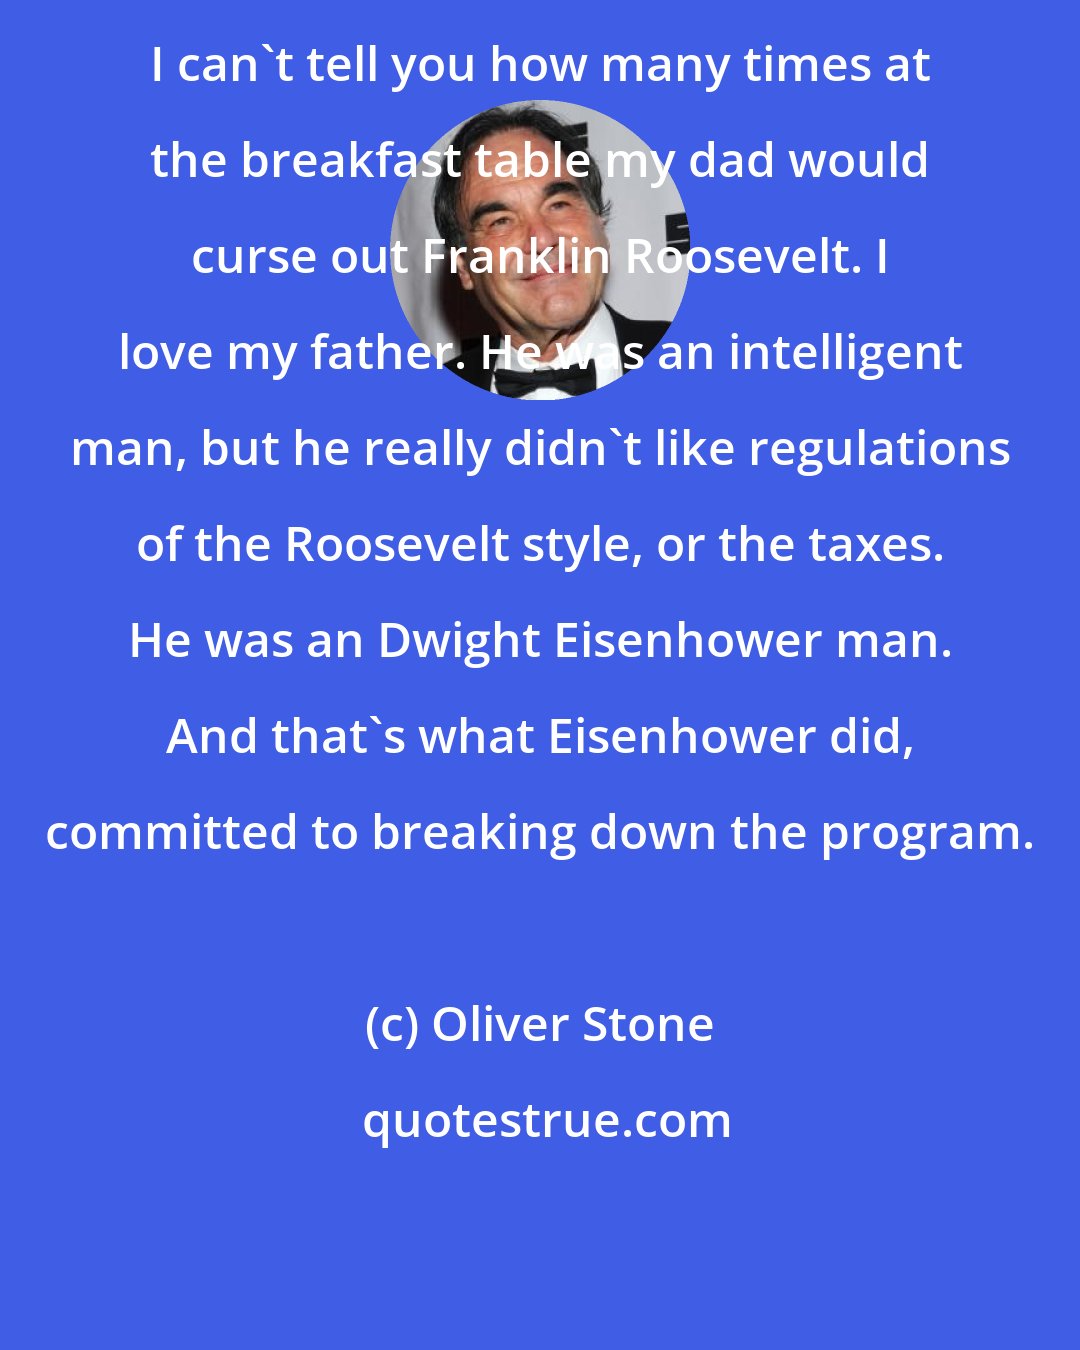 Oliver Stone: I can't tell you how many times at the breakfast table my dad would curse out Franklin Roosevelt. I love my father. He was an intelligent man, but he really didn't like regulations of the Roosevelt style, or the taxes. He was an Dwight Eisenhower man. And that's what Eisenhower did, committed to breaking down the program.